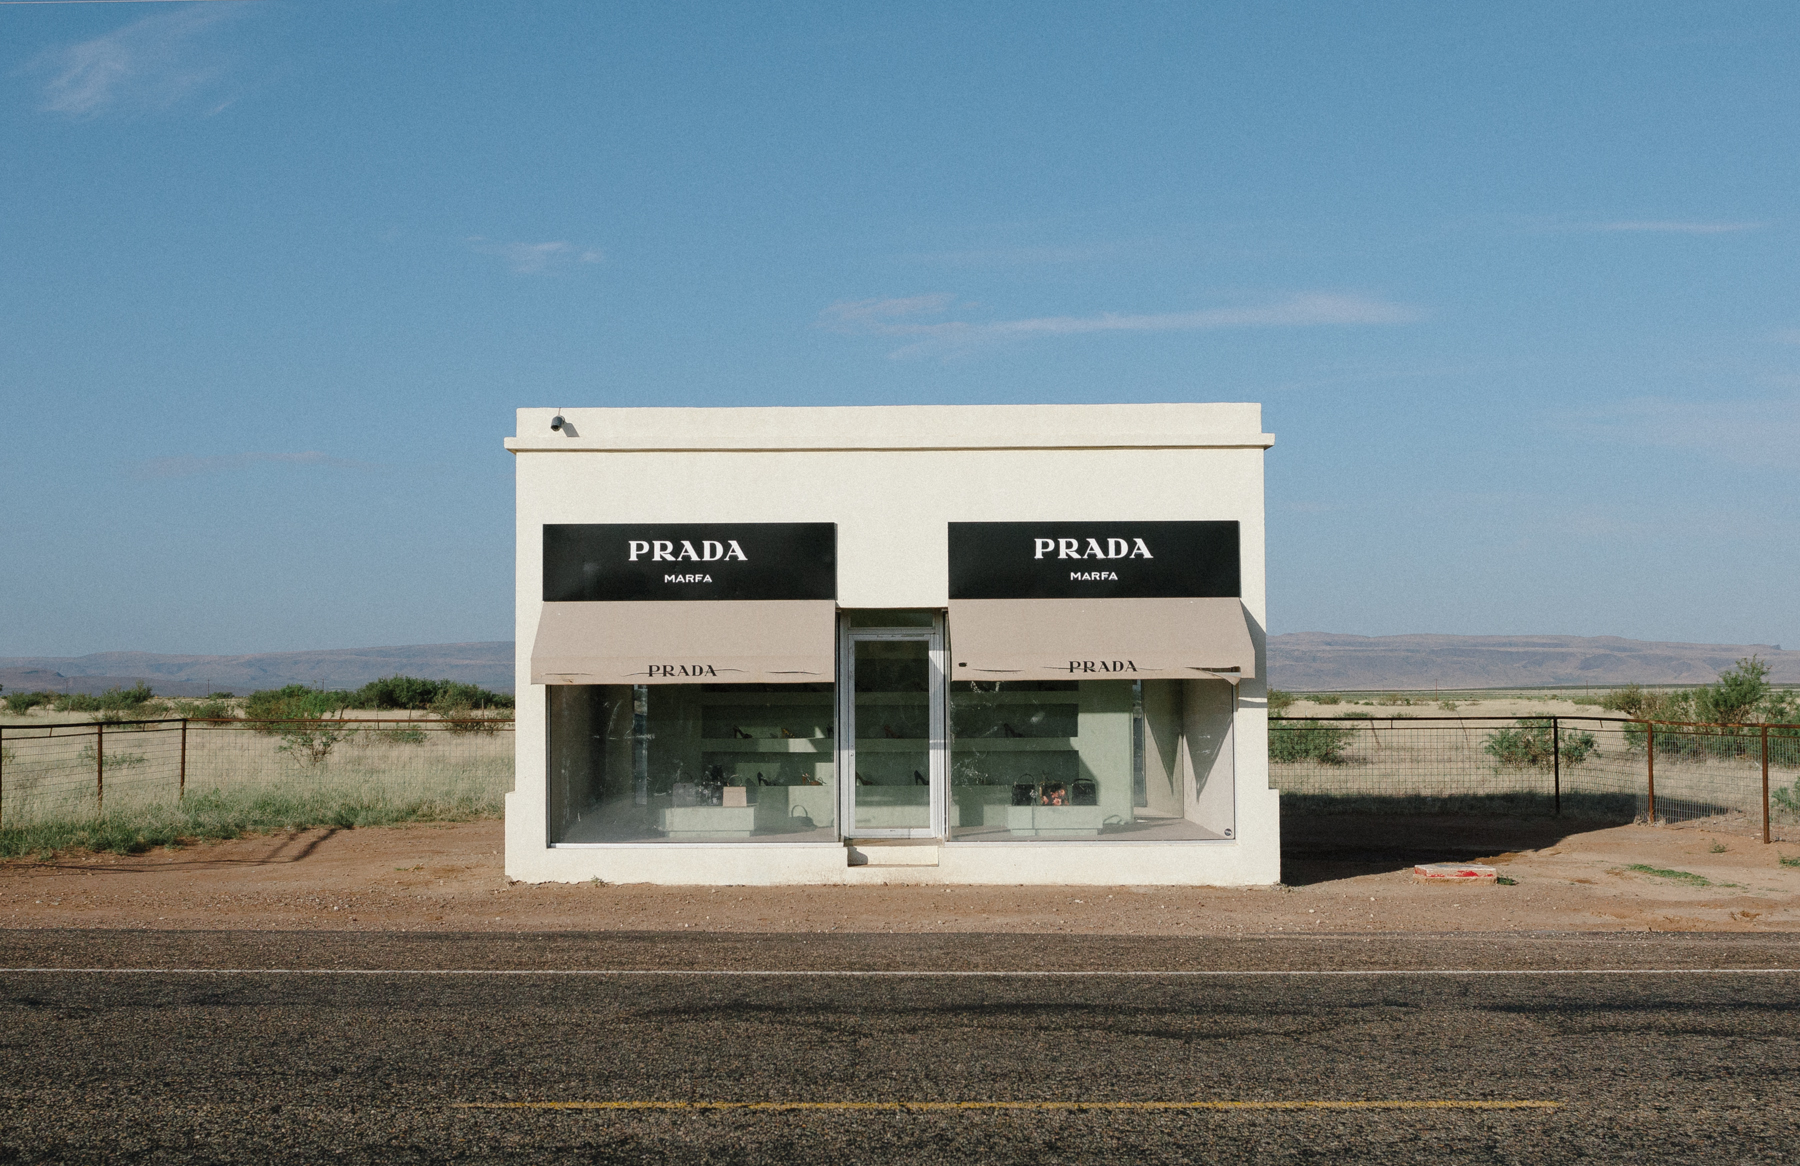 Prada Marfa is probably the world's most famous Prada shop - except it isn't a shop, it's an art installation (complete with Prada handbags and shoes) on a isolated stretch of road outside of Marfa. It's bizarre and wonderful.